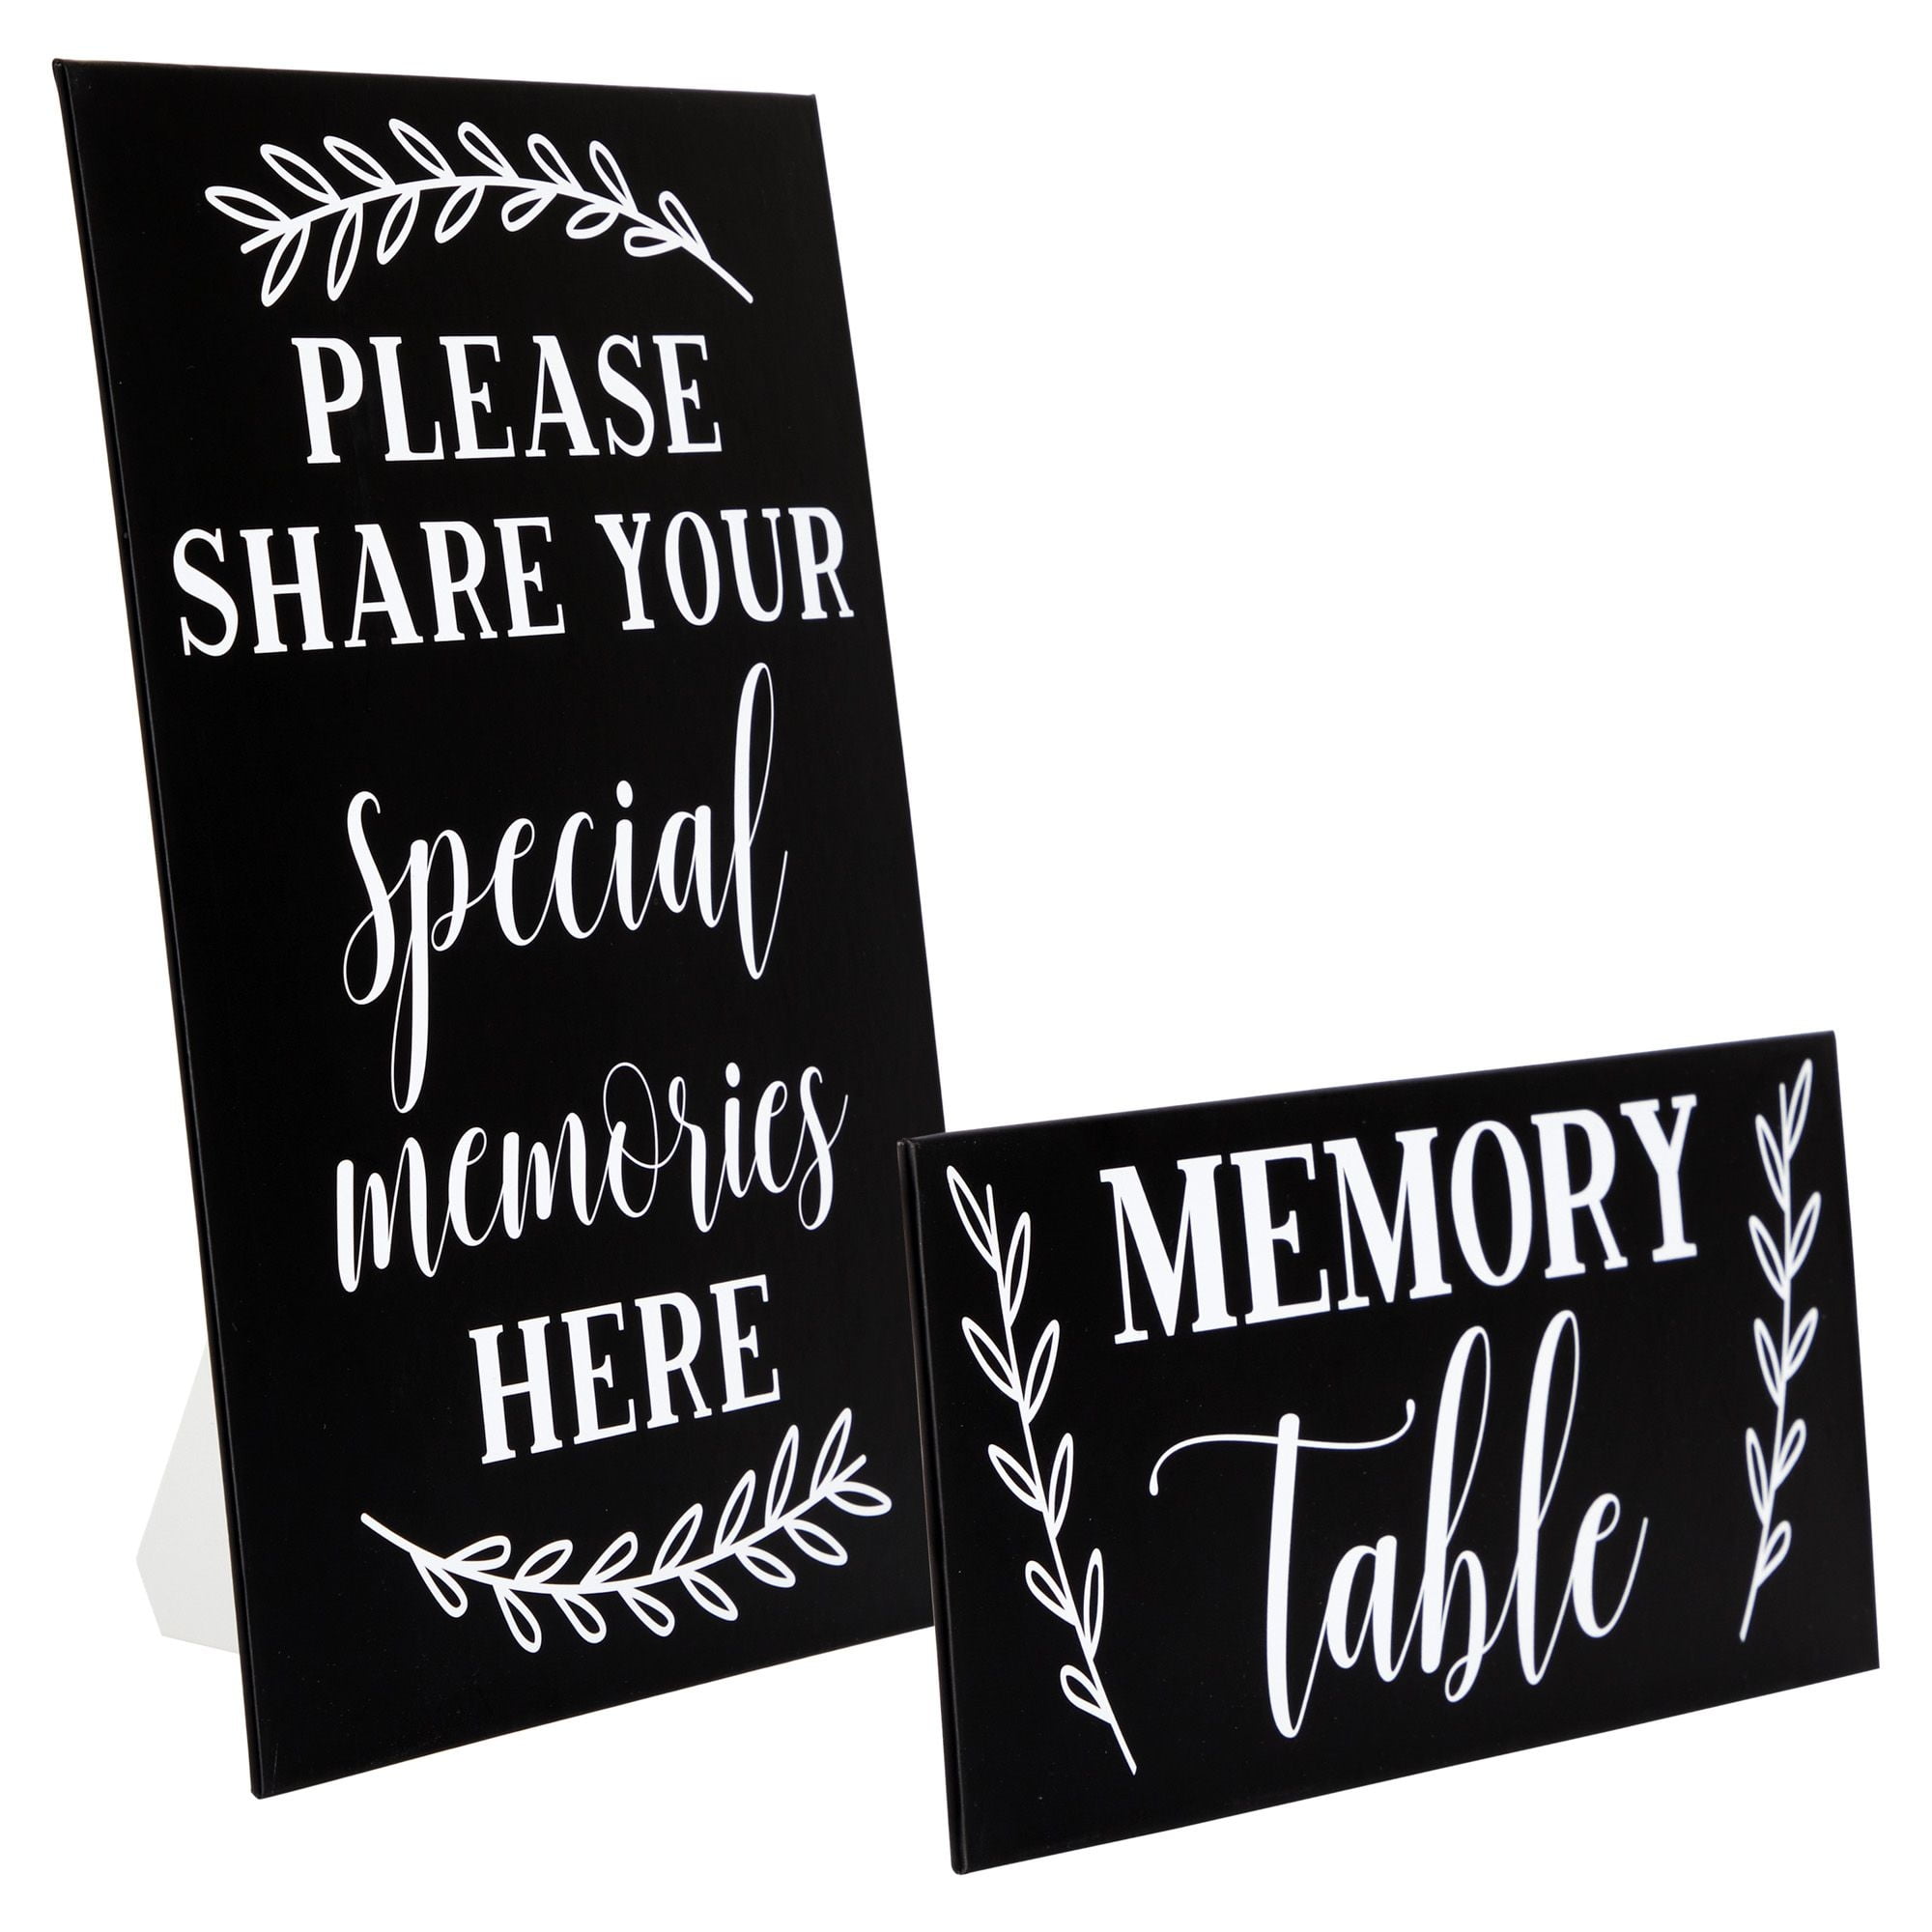 Personalized In Loving Memory Funeral Sign With Photo - Custom Celebration  Of Life Sign - Celebration Of Life Decorations 